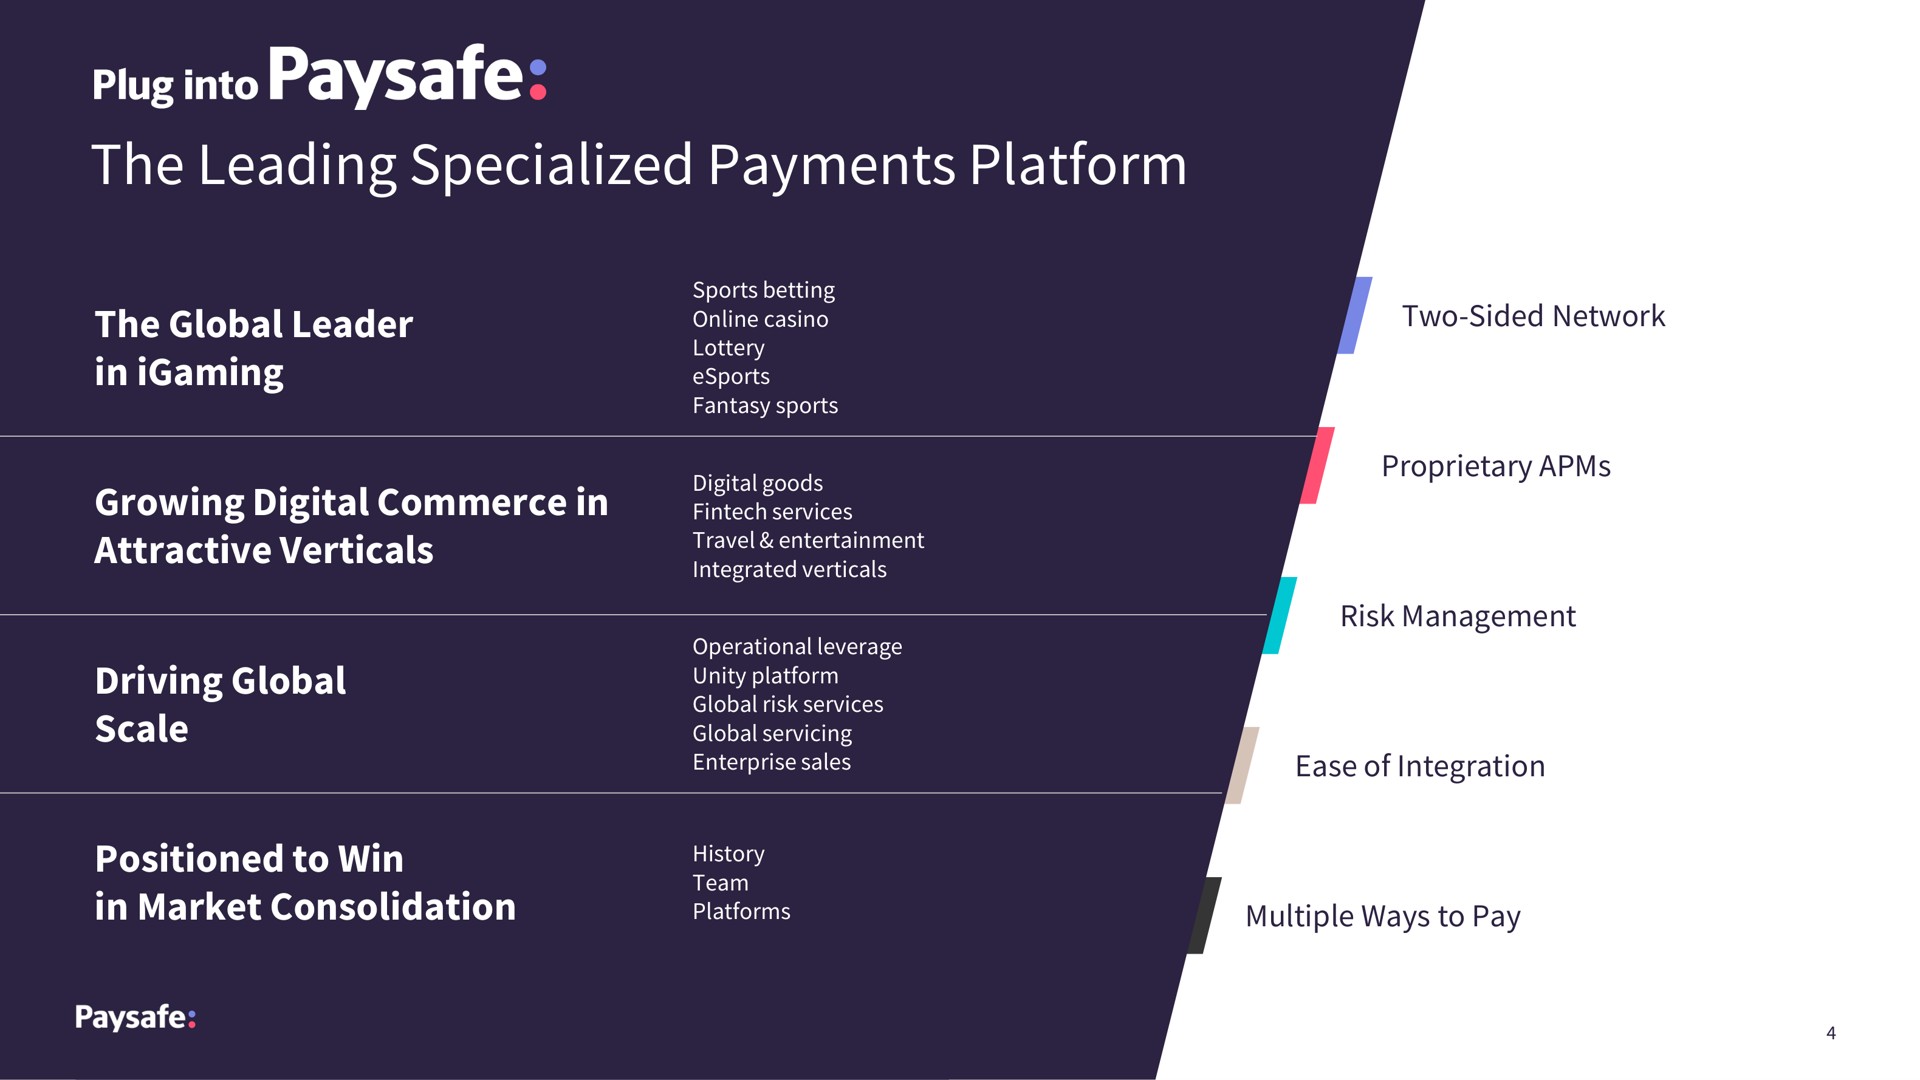 the leading specialized payments platform wets attractive verticals | Paysafe